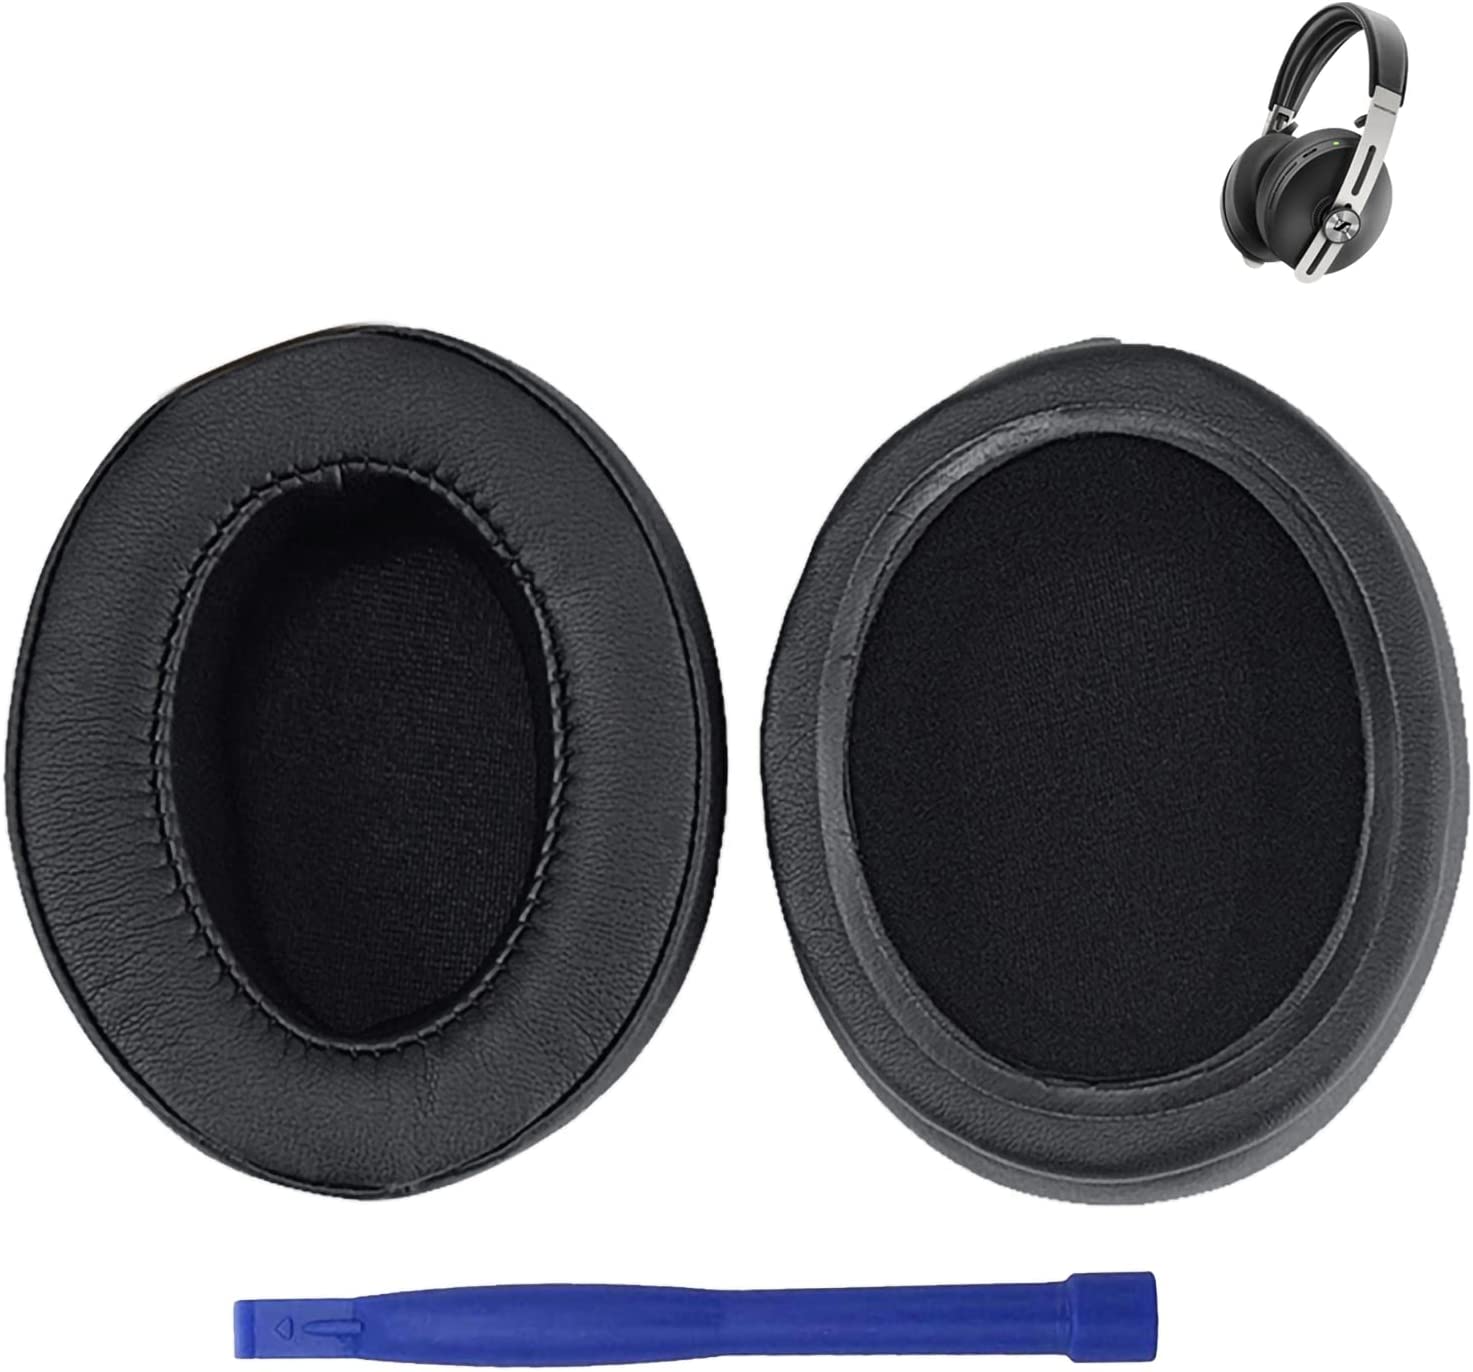 Aiivioll Momentum 2.0 Replacement Earpads Quite-Comfort Protein Leather Ear Cushion Cover Earmuff Repair Part for Sennheiser HD1 Momentum1.0 Momentum 2.0 Over-Ear Headset(Black +Black Net) - image 1 of 8